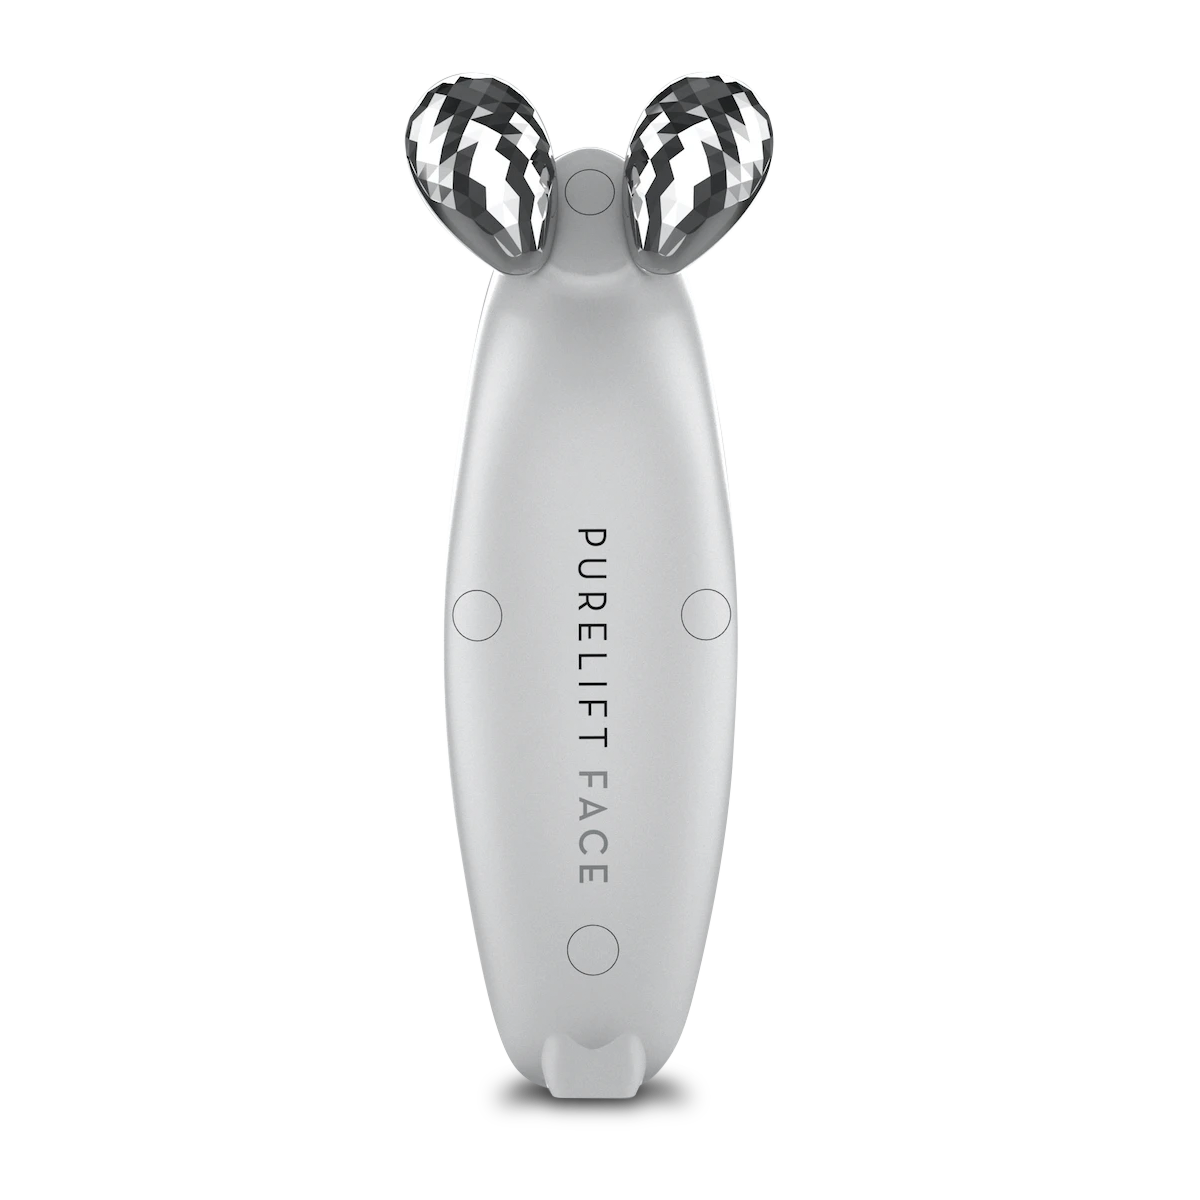 PureLift ® Face 1 - Non-invasive facelift. - TheRecoveryLab.com